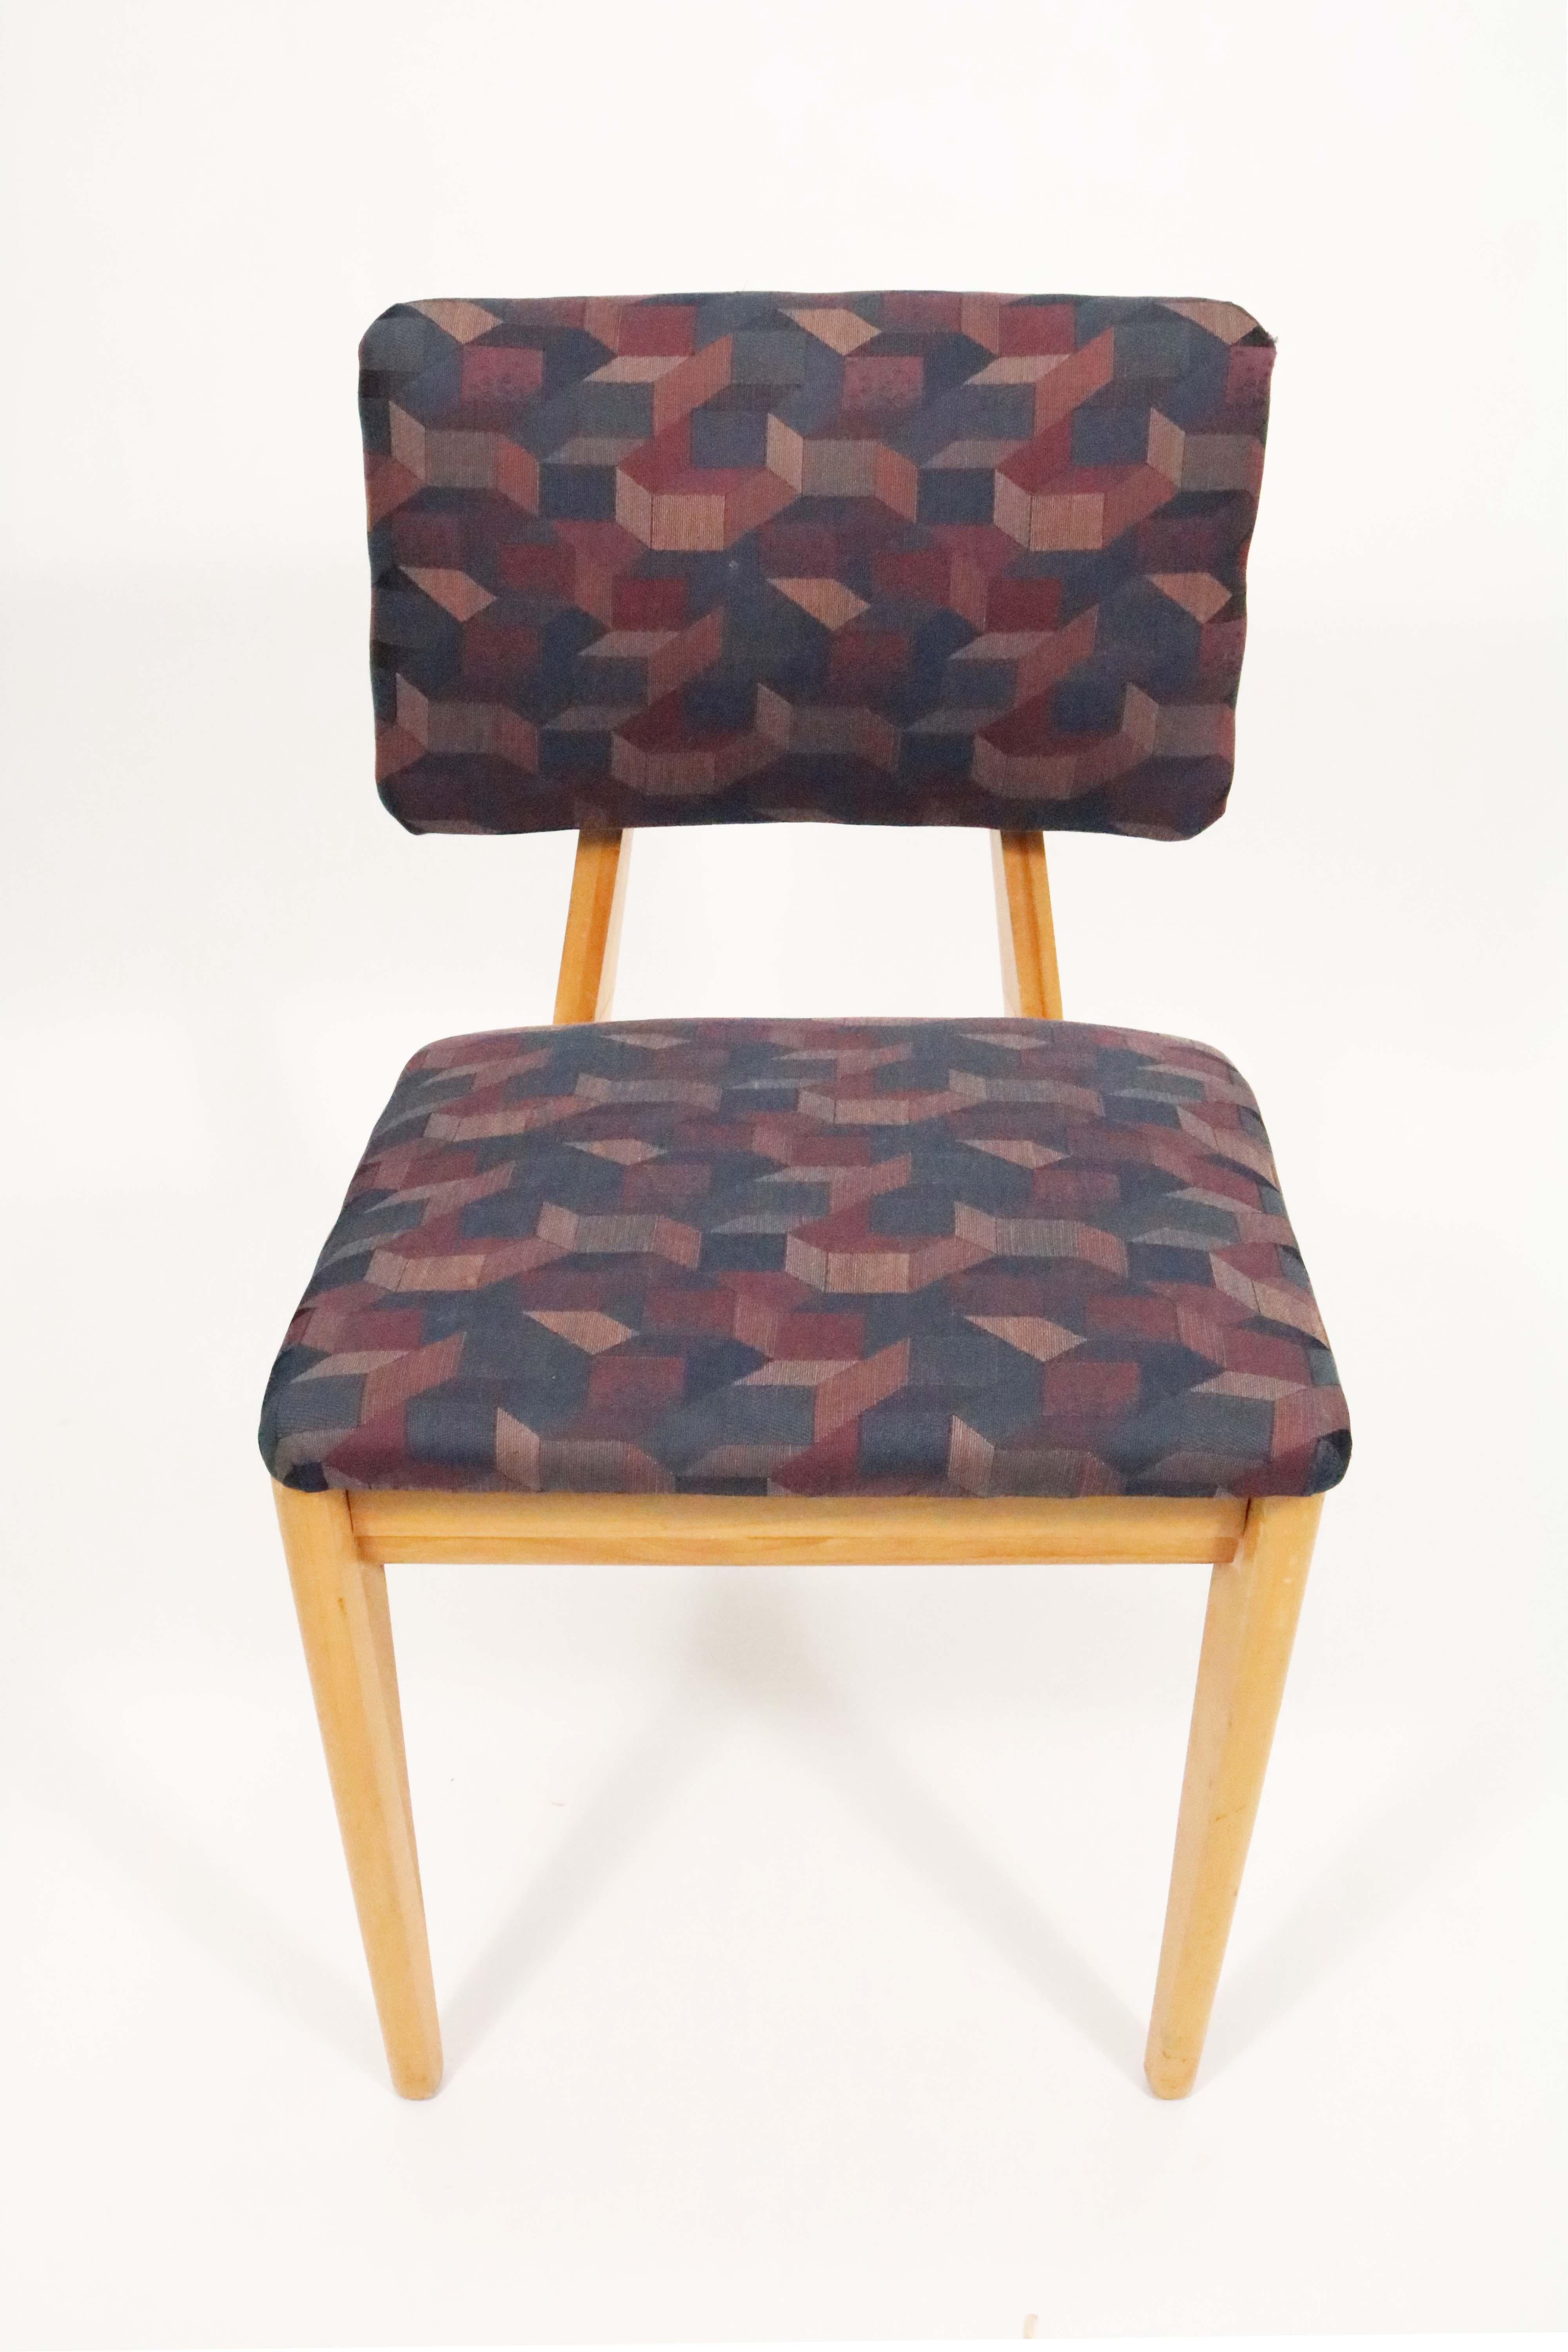 Dining or Desk Chair by Ernest Farmer for George Nelson and Associates In Good Condition For Sale In Littleton, CO